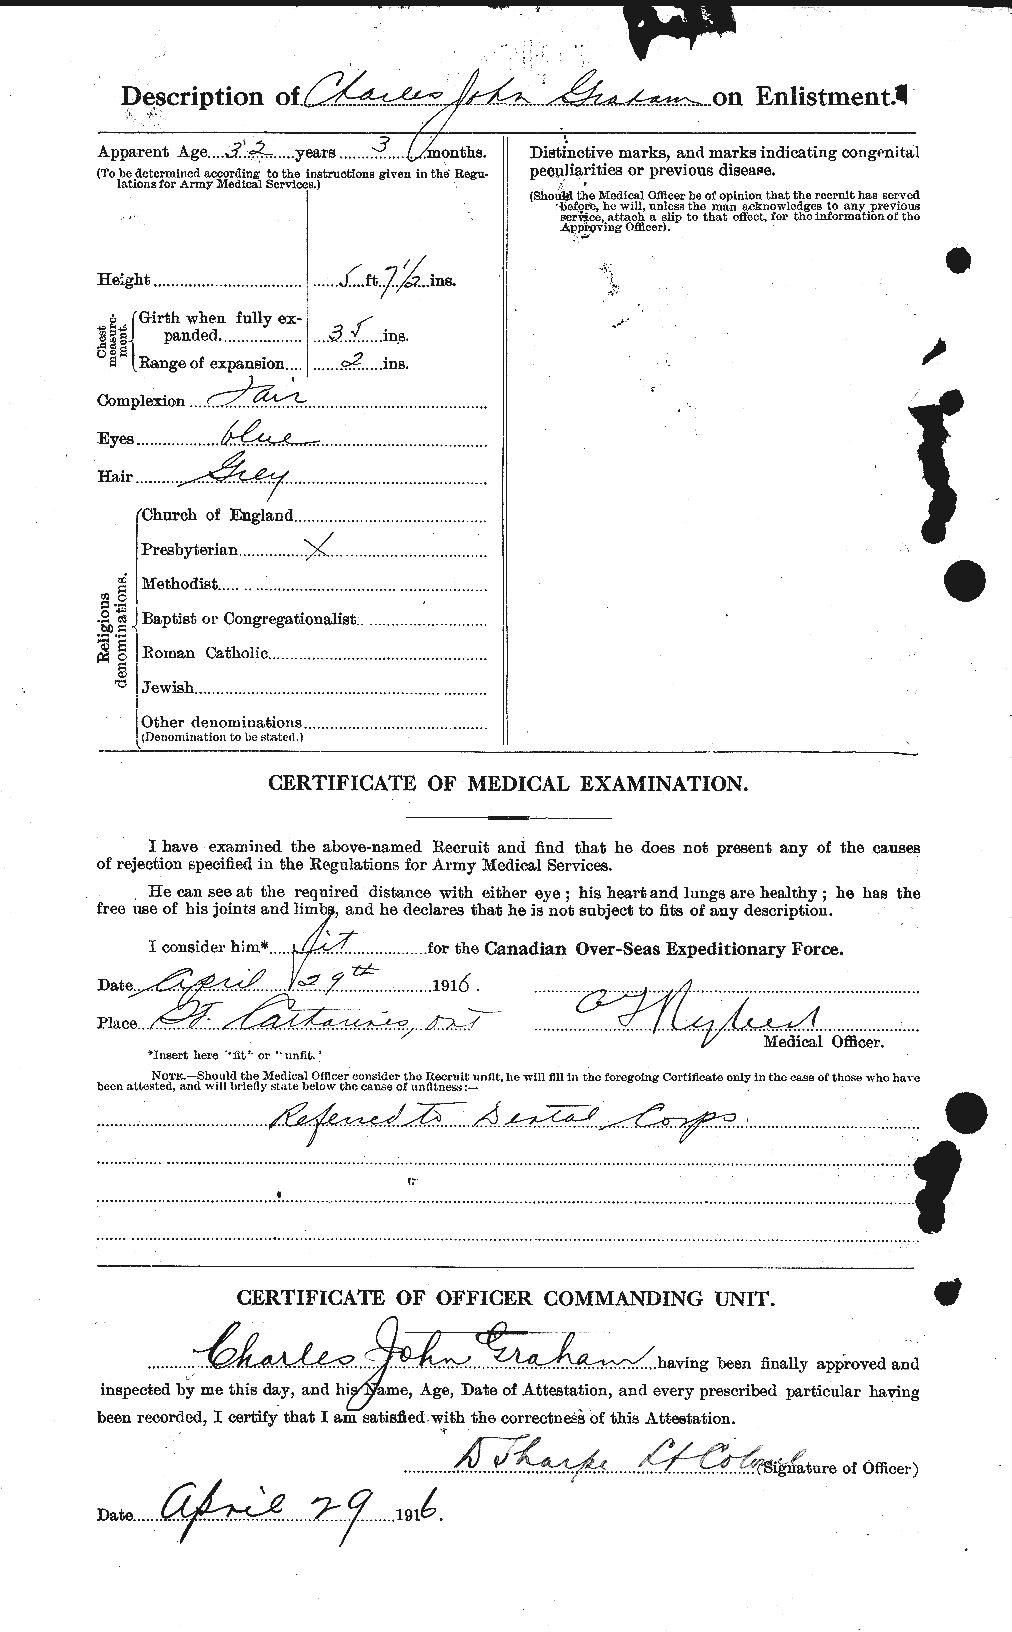 Personnel Records of the First World War - CEF 359717b